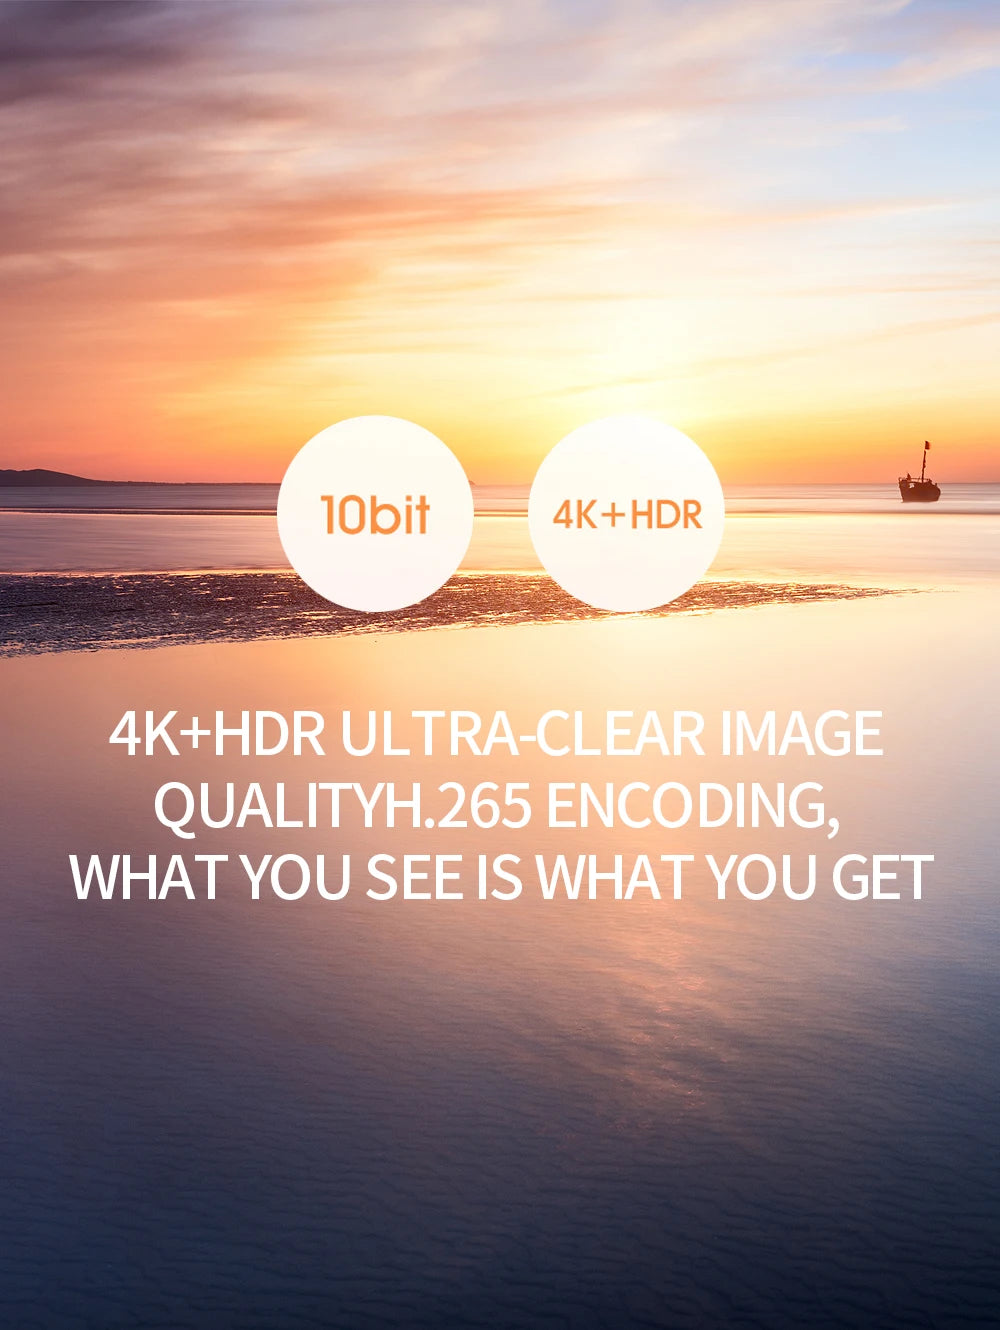 F11S PRO Drone, IObit 4K+HDR ULTRA-CLEAR IMAGE QUAL